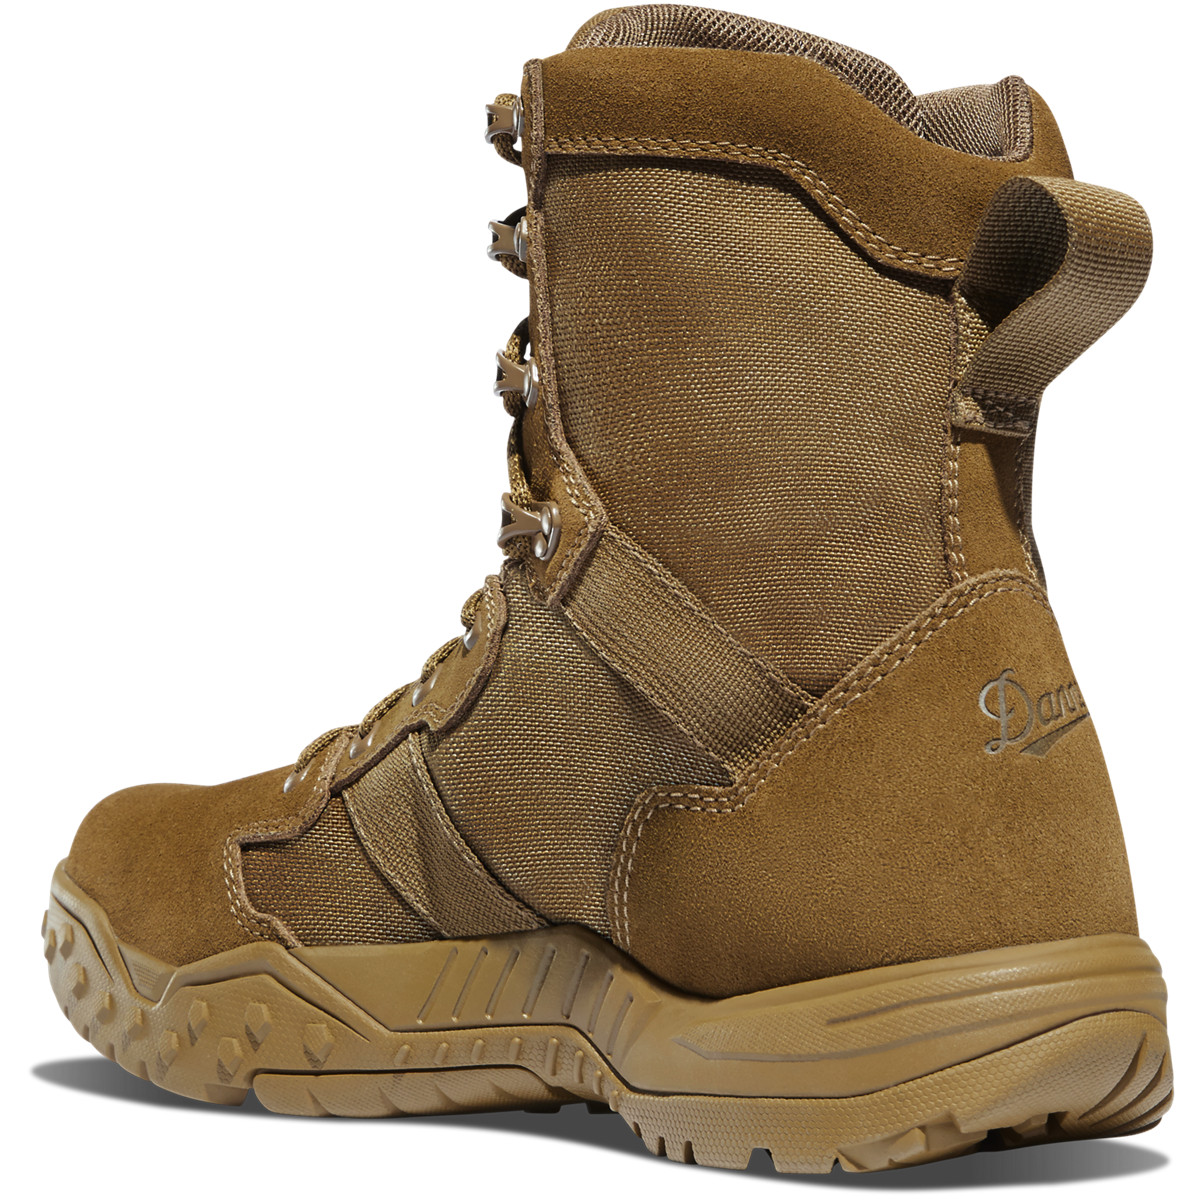 Details about   Danner Men's 55316 Tanicus 8" Coyote Hot AR-670-1 Military Tactical Shoes Boots 